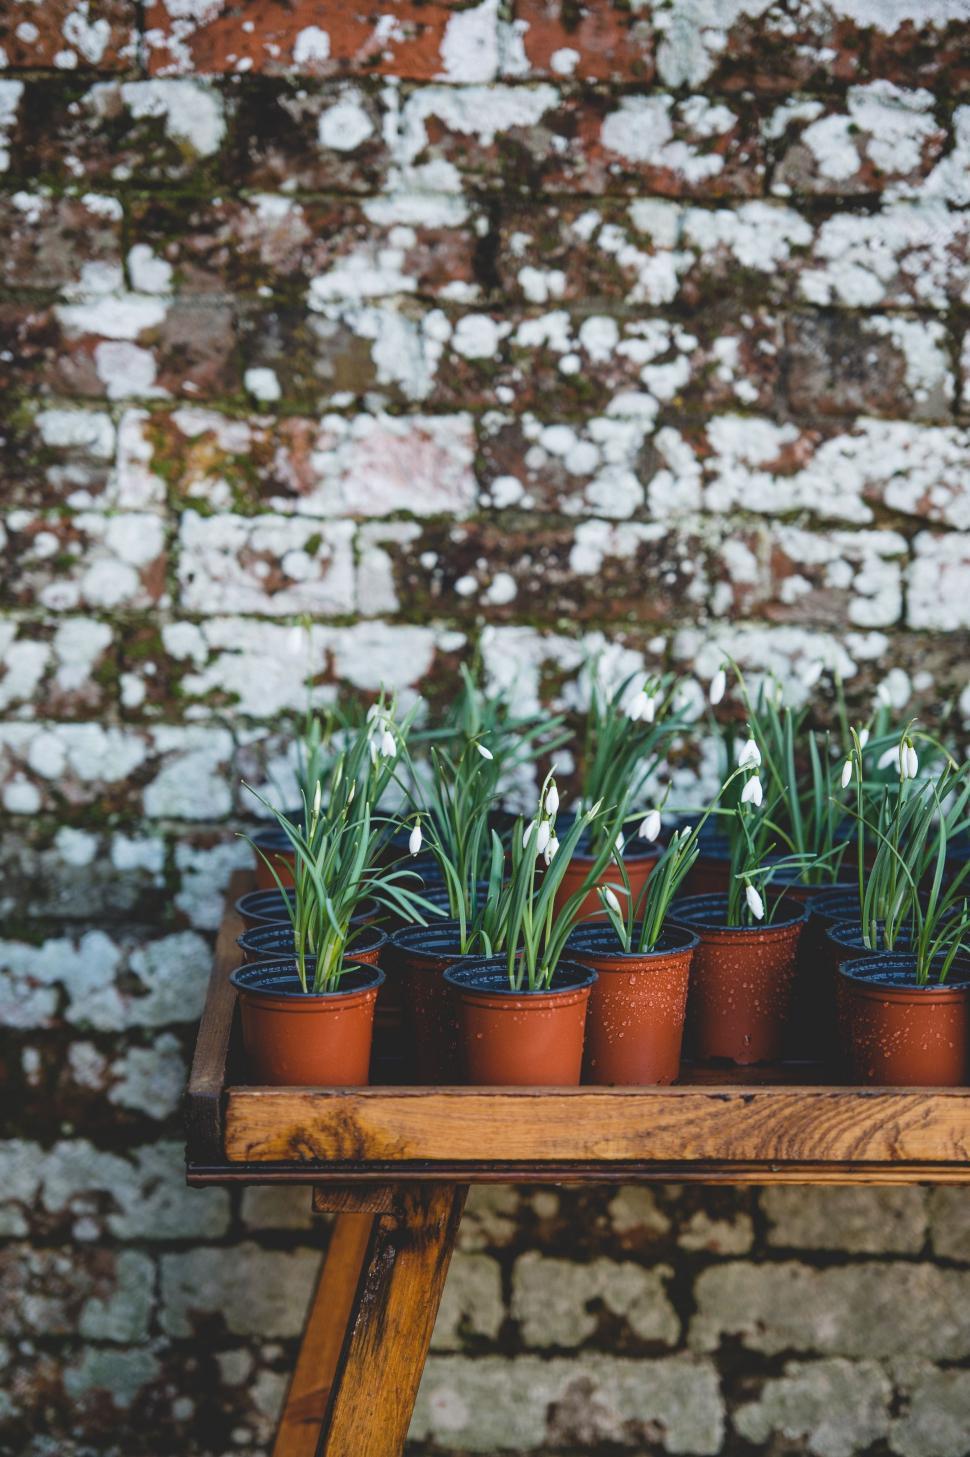 Free Image of Wooden Table With Potted Plants Next to Brick Wall 